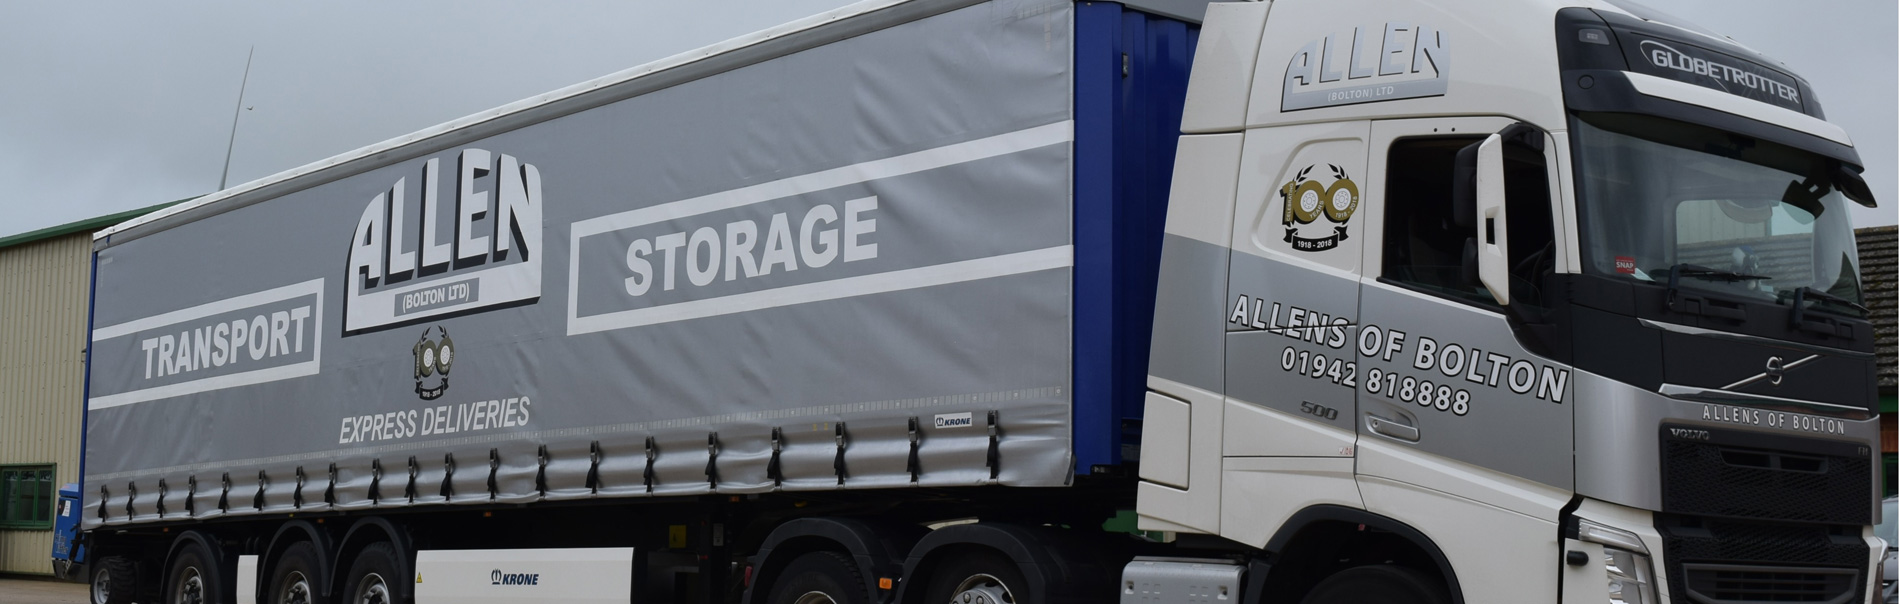 Allen Transport - Haulage and Transport in Bolton